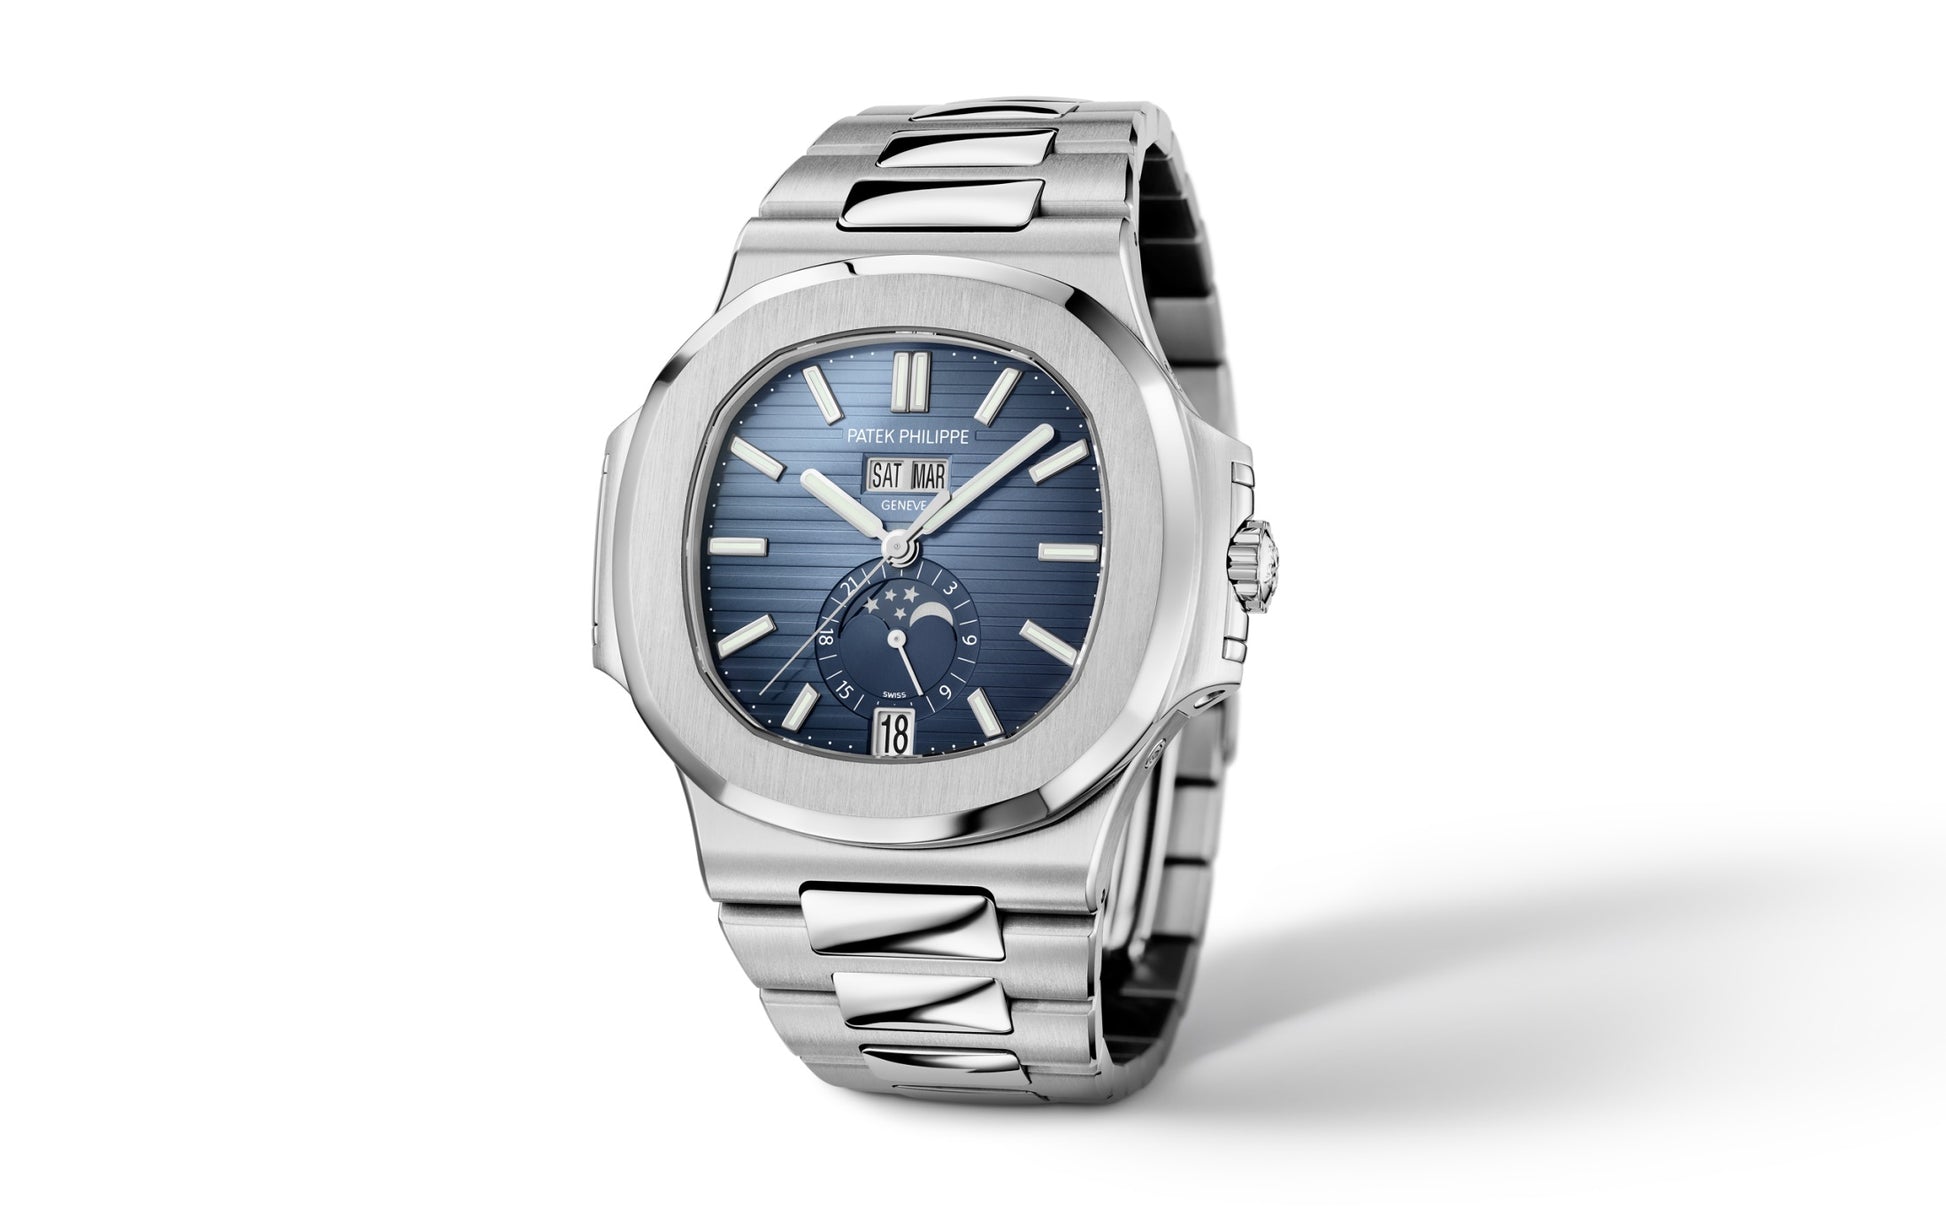 Patek Philippe Nautilus Annual Calendar, Moon Phases Watch, Stainless Steel, 40,5 mm, Ref# 5726/1A-014, Main view